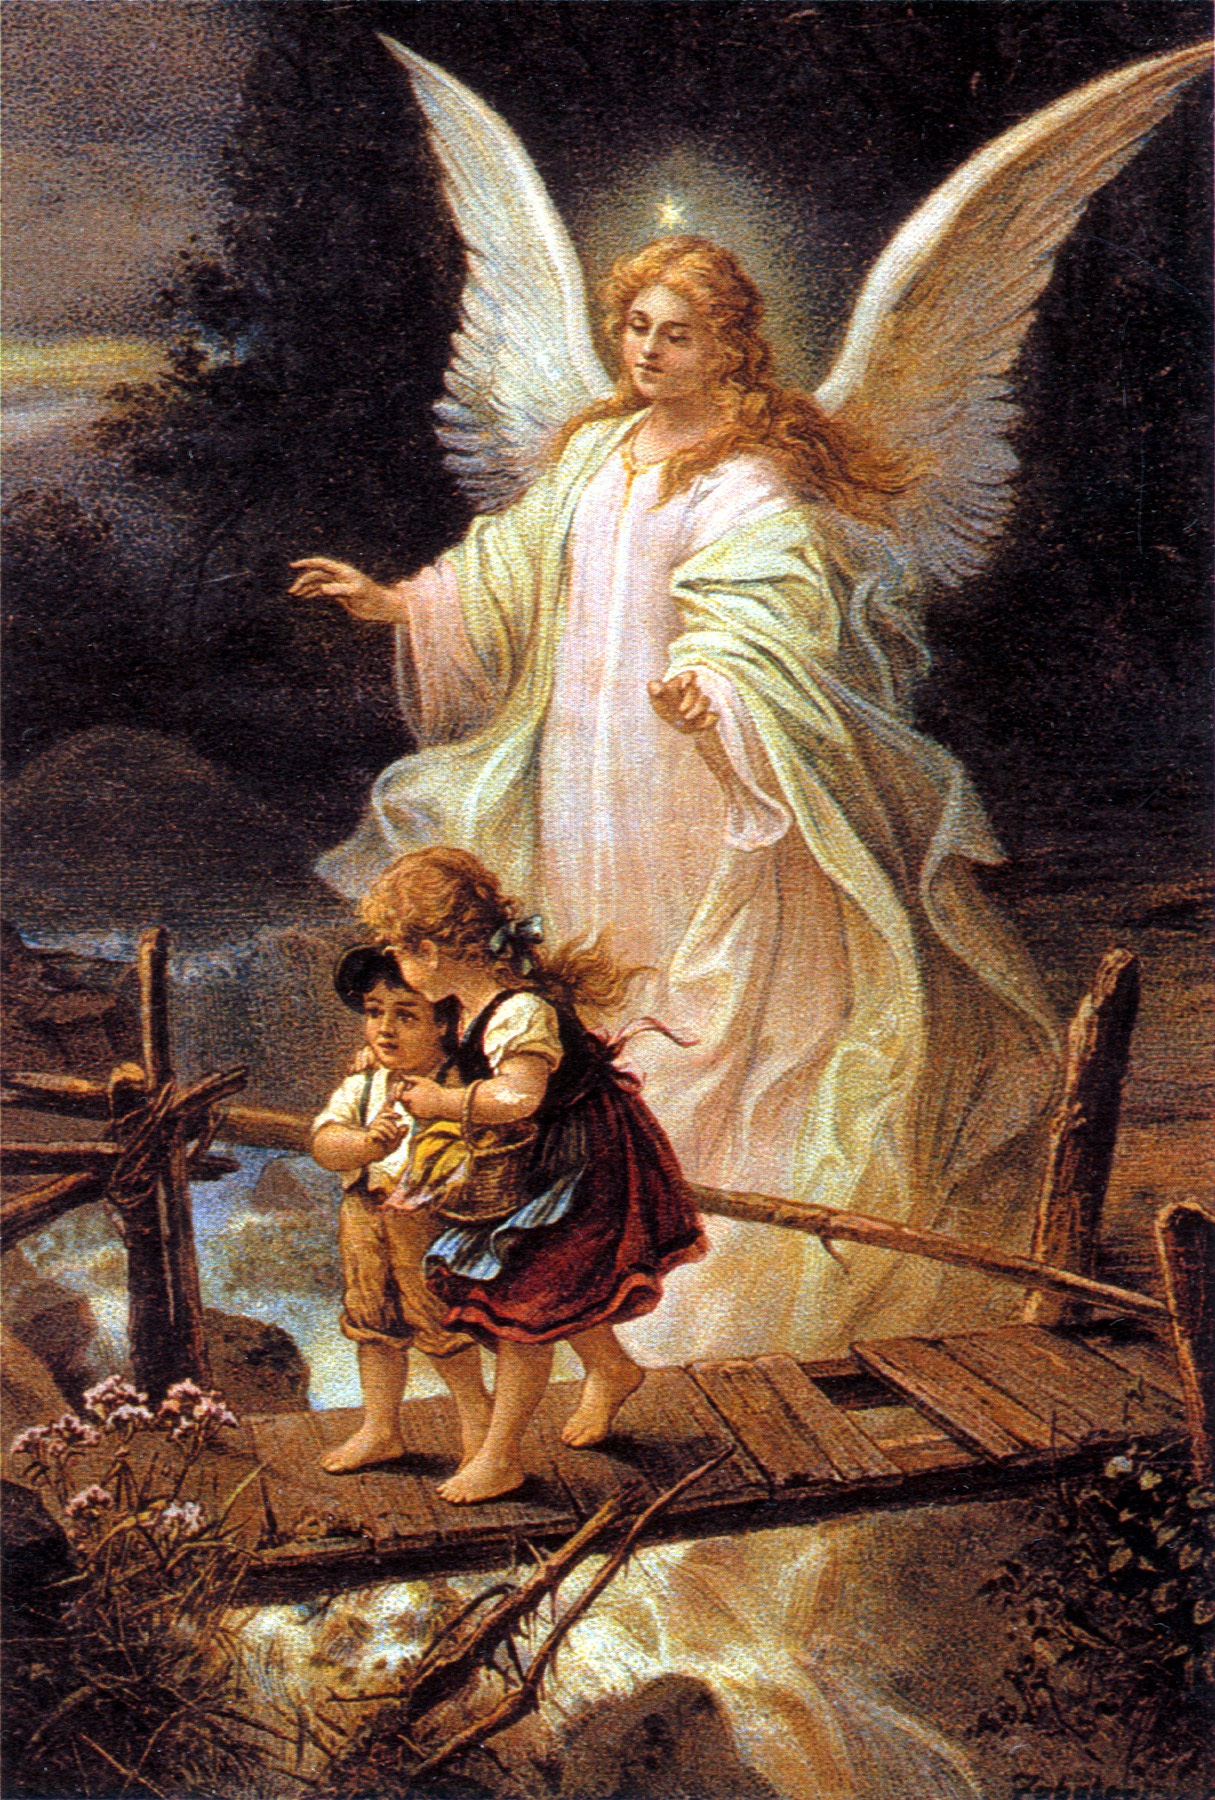 The Story Behind This Famous Guardian Angel Painting | Appalachian ...